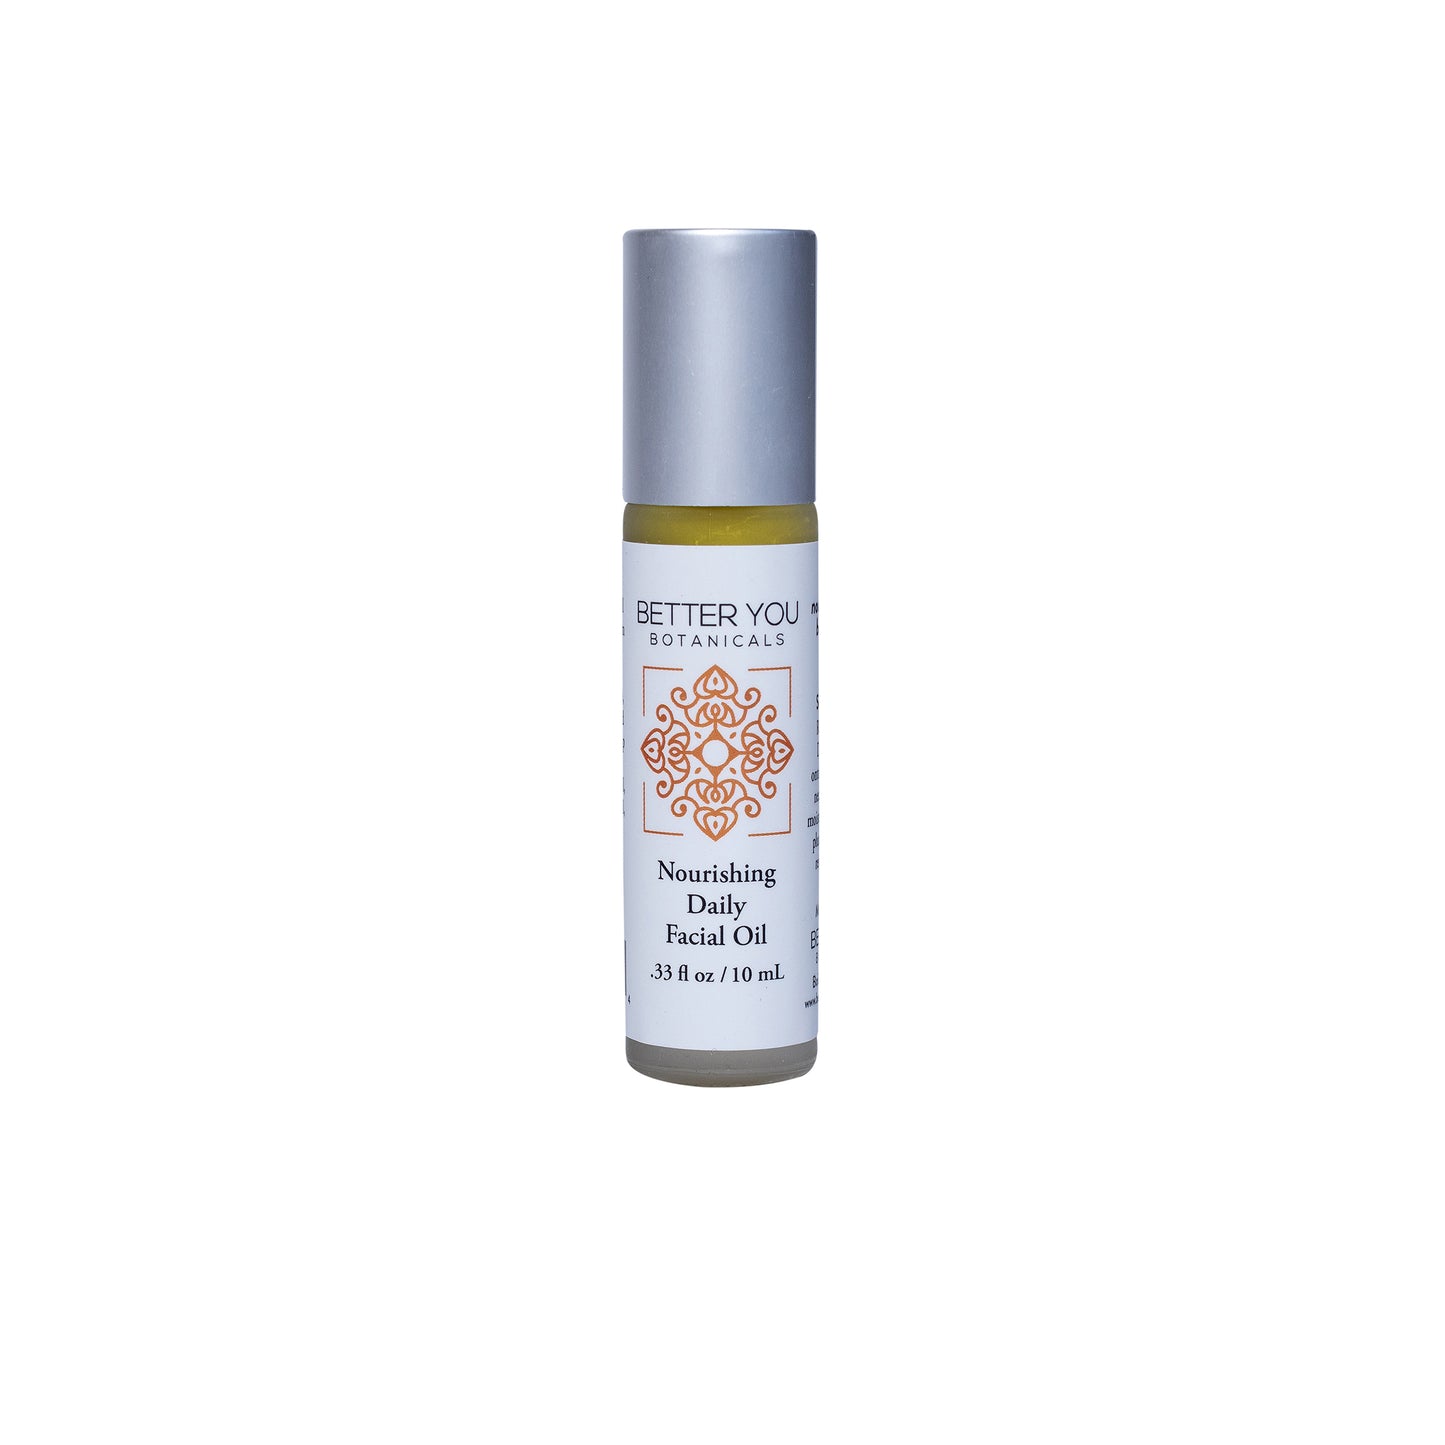 Nourishing Daily Facial Oil Travel Size